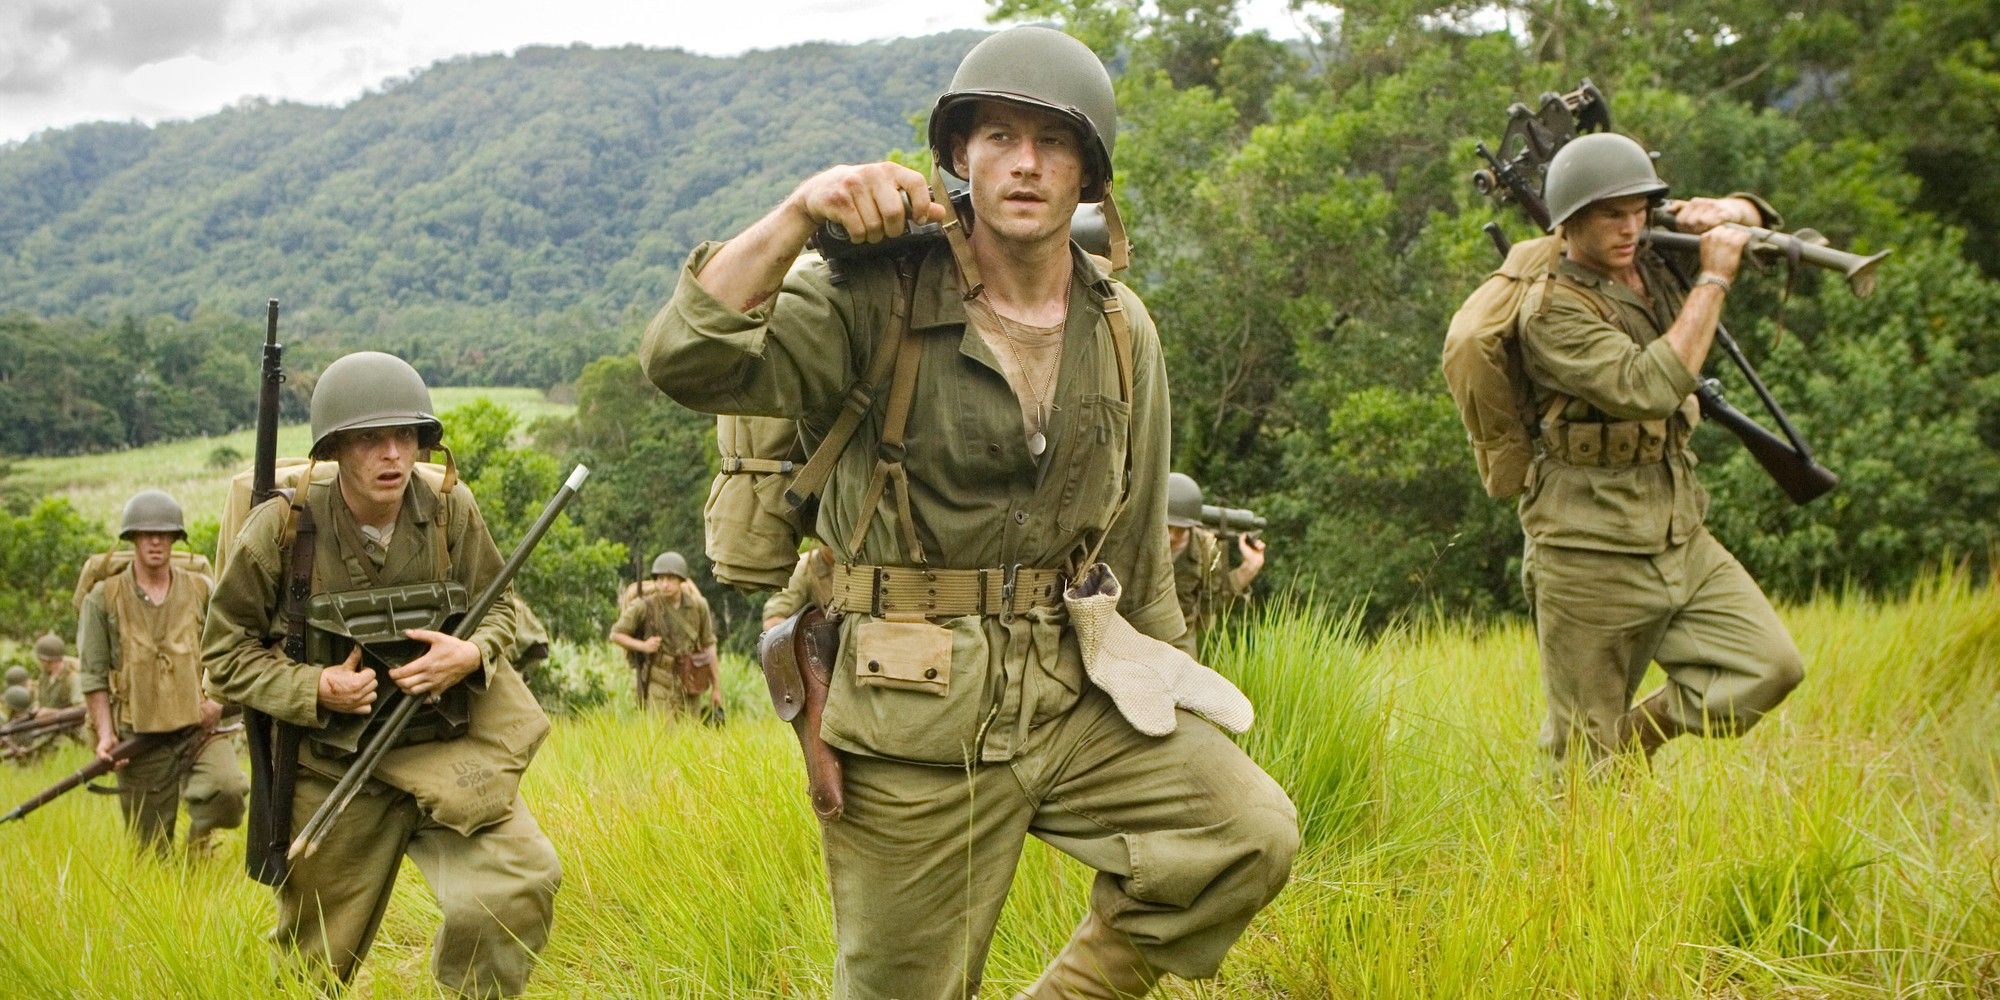 Soldiers walking through long grass in The Pacific Episode 1